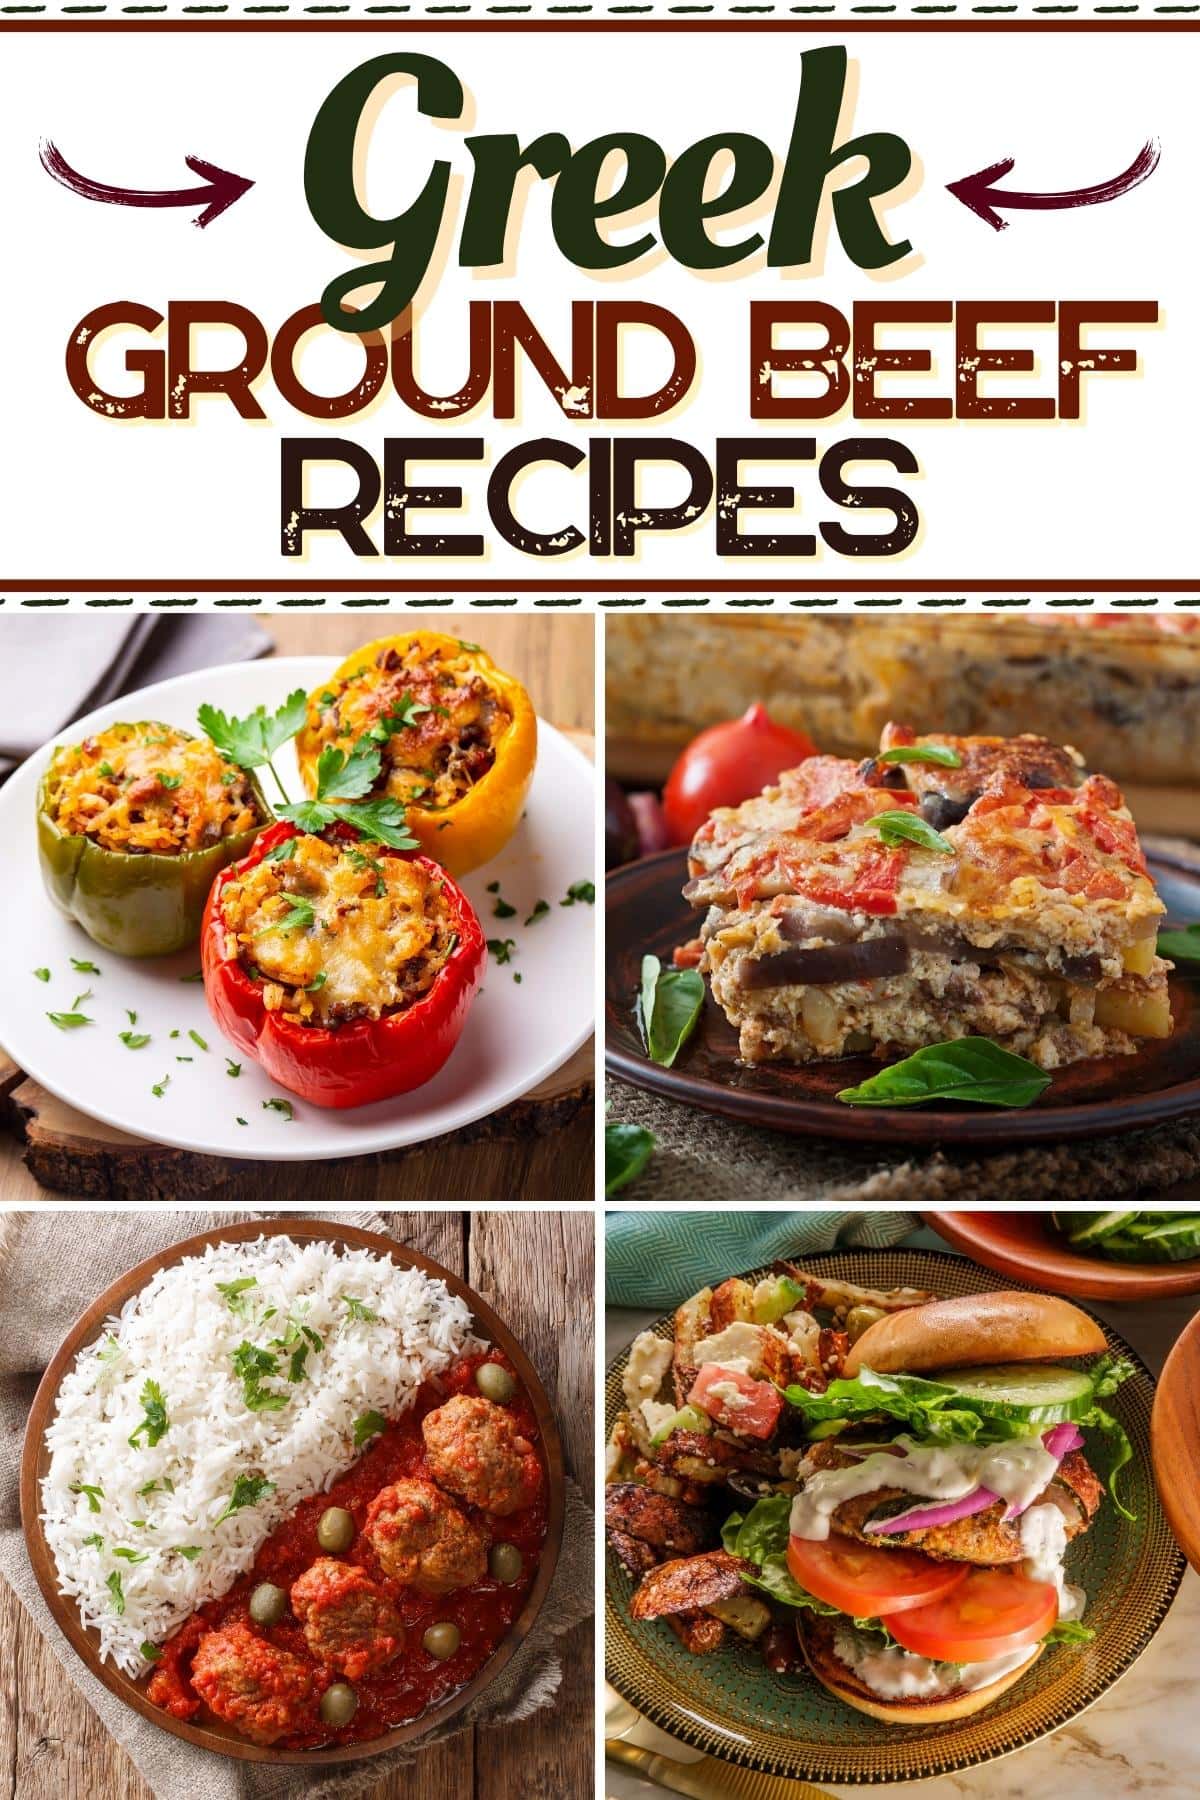 10 Greek Ground Beef Recipes (Easy Mediterranean Dishes) - Insanely Good